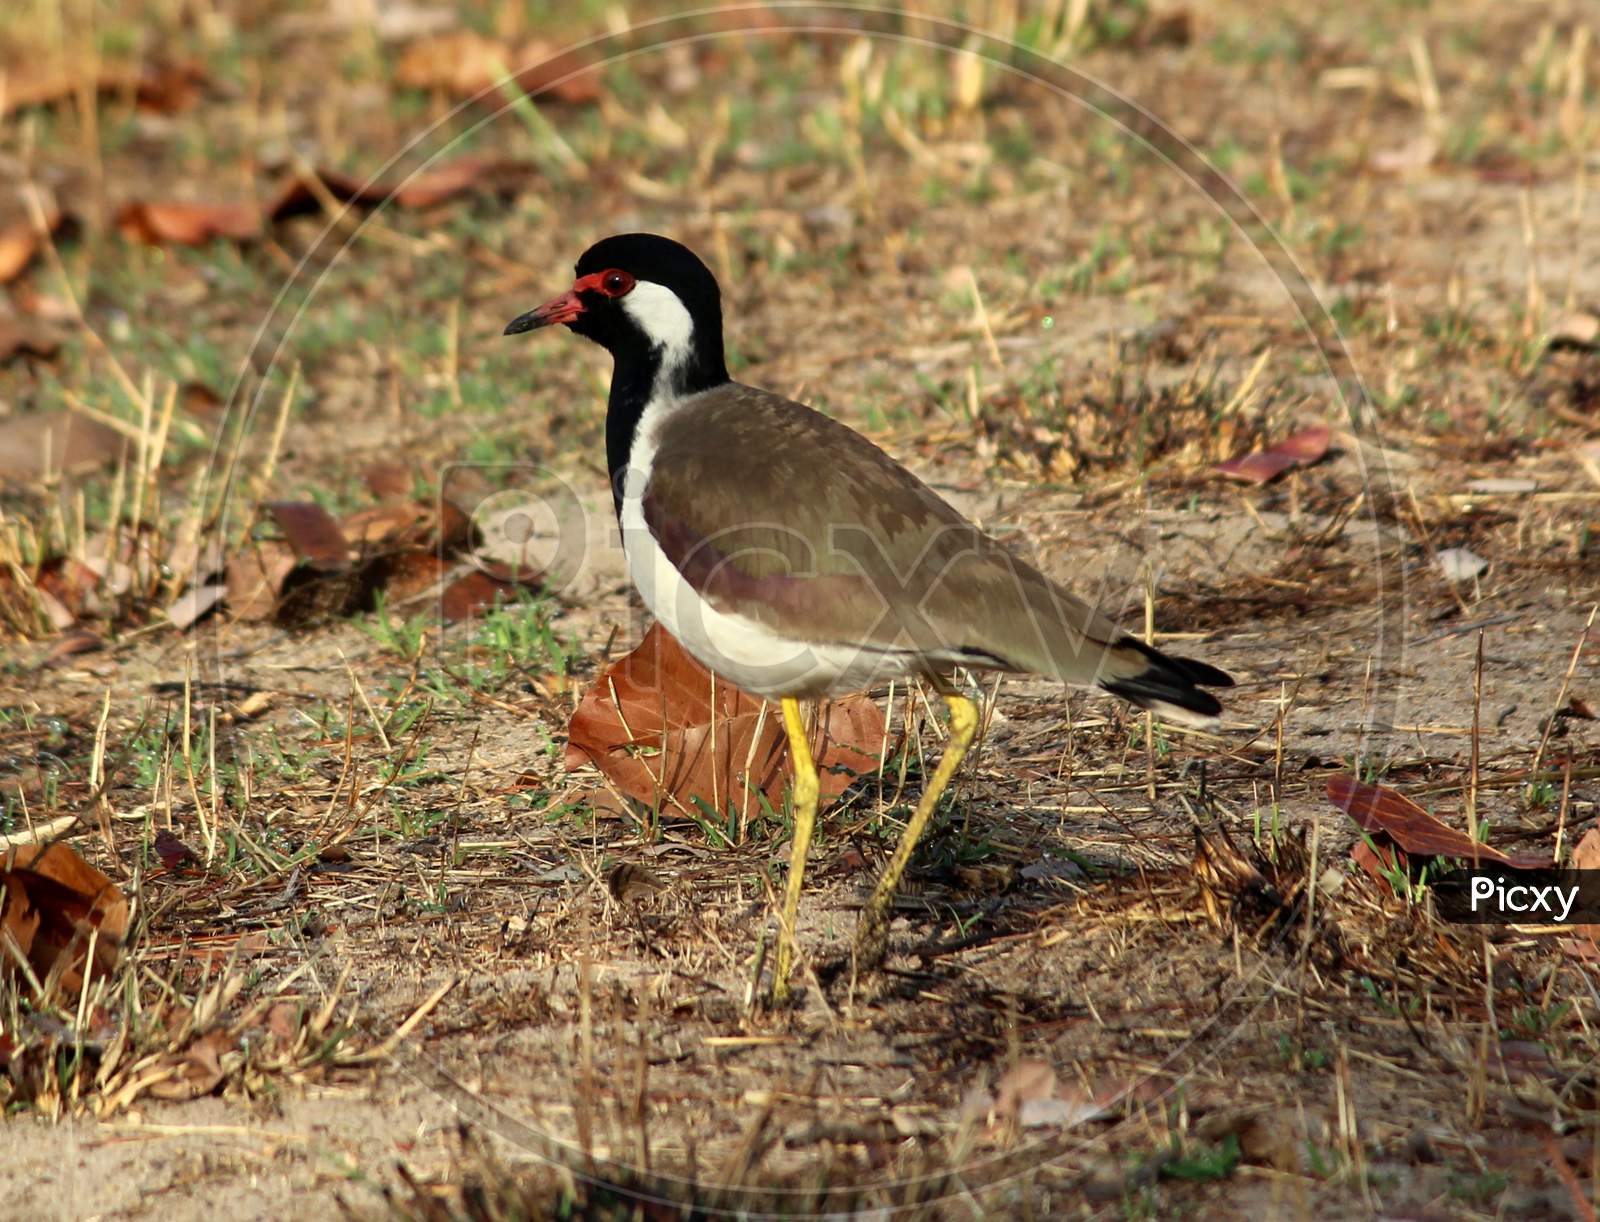 The Red-wattled lapwing